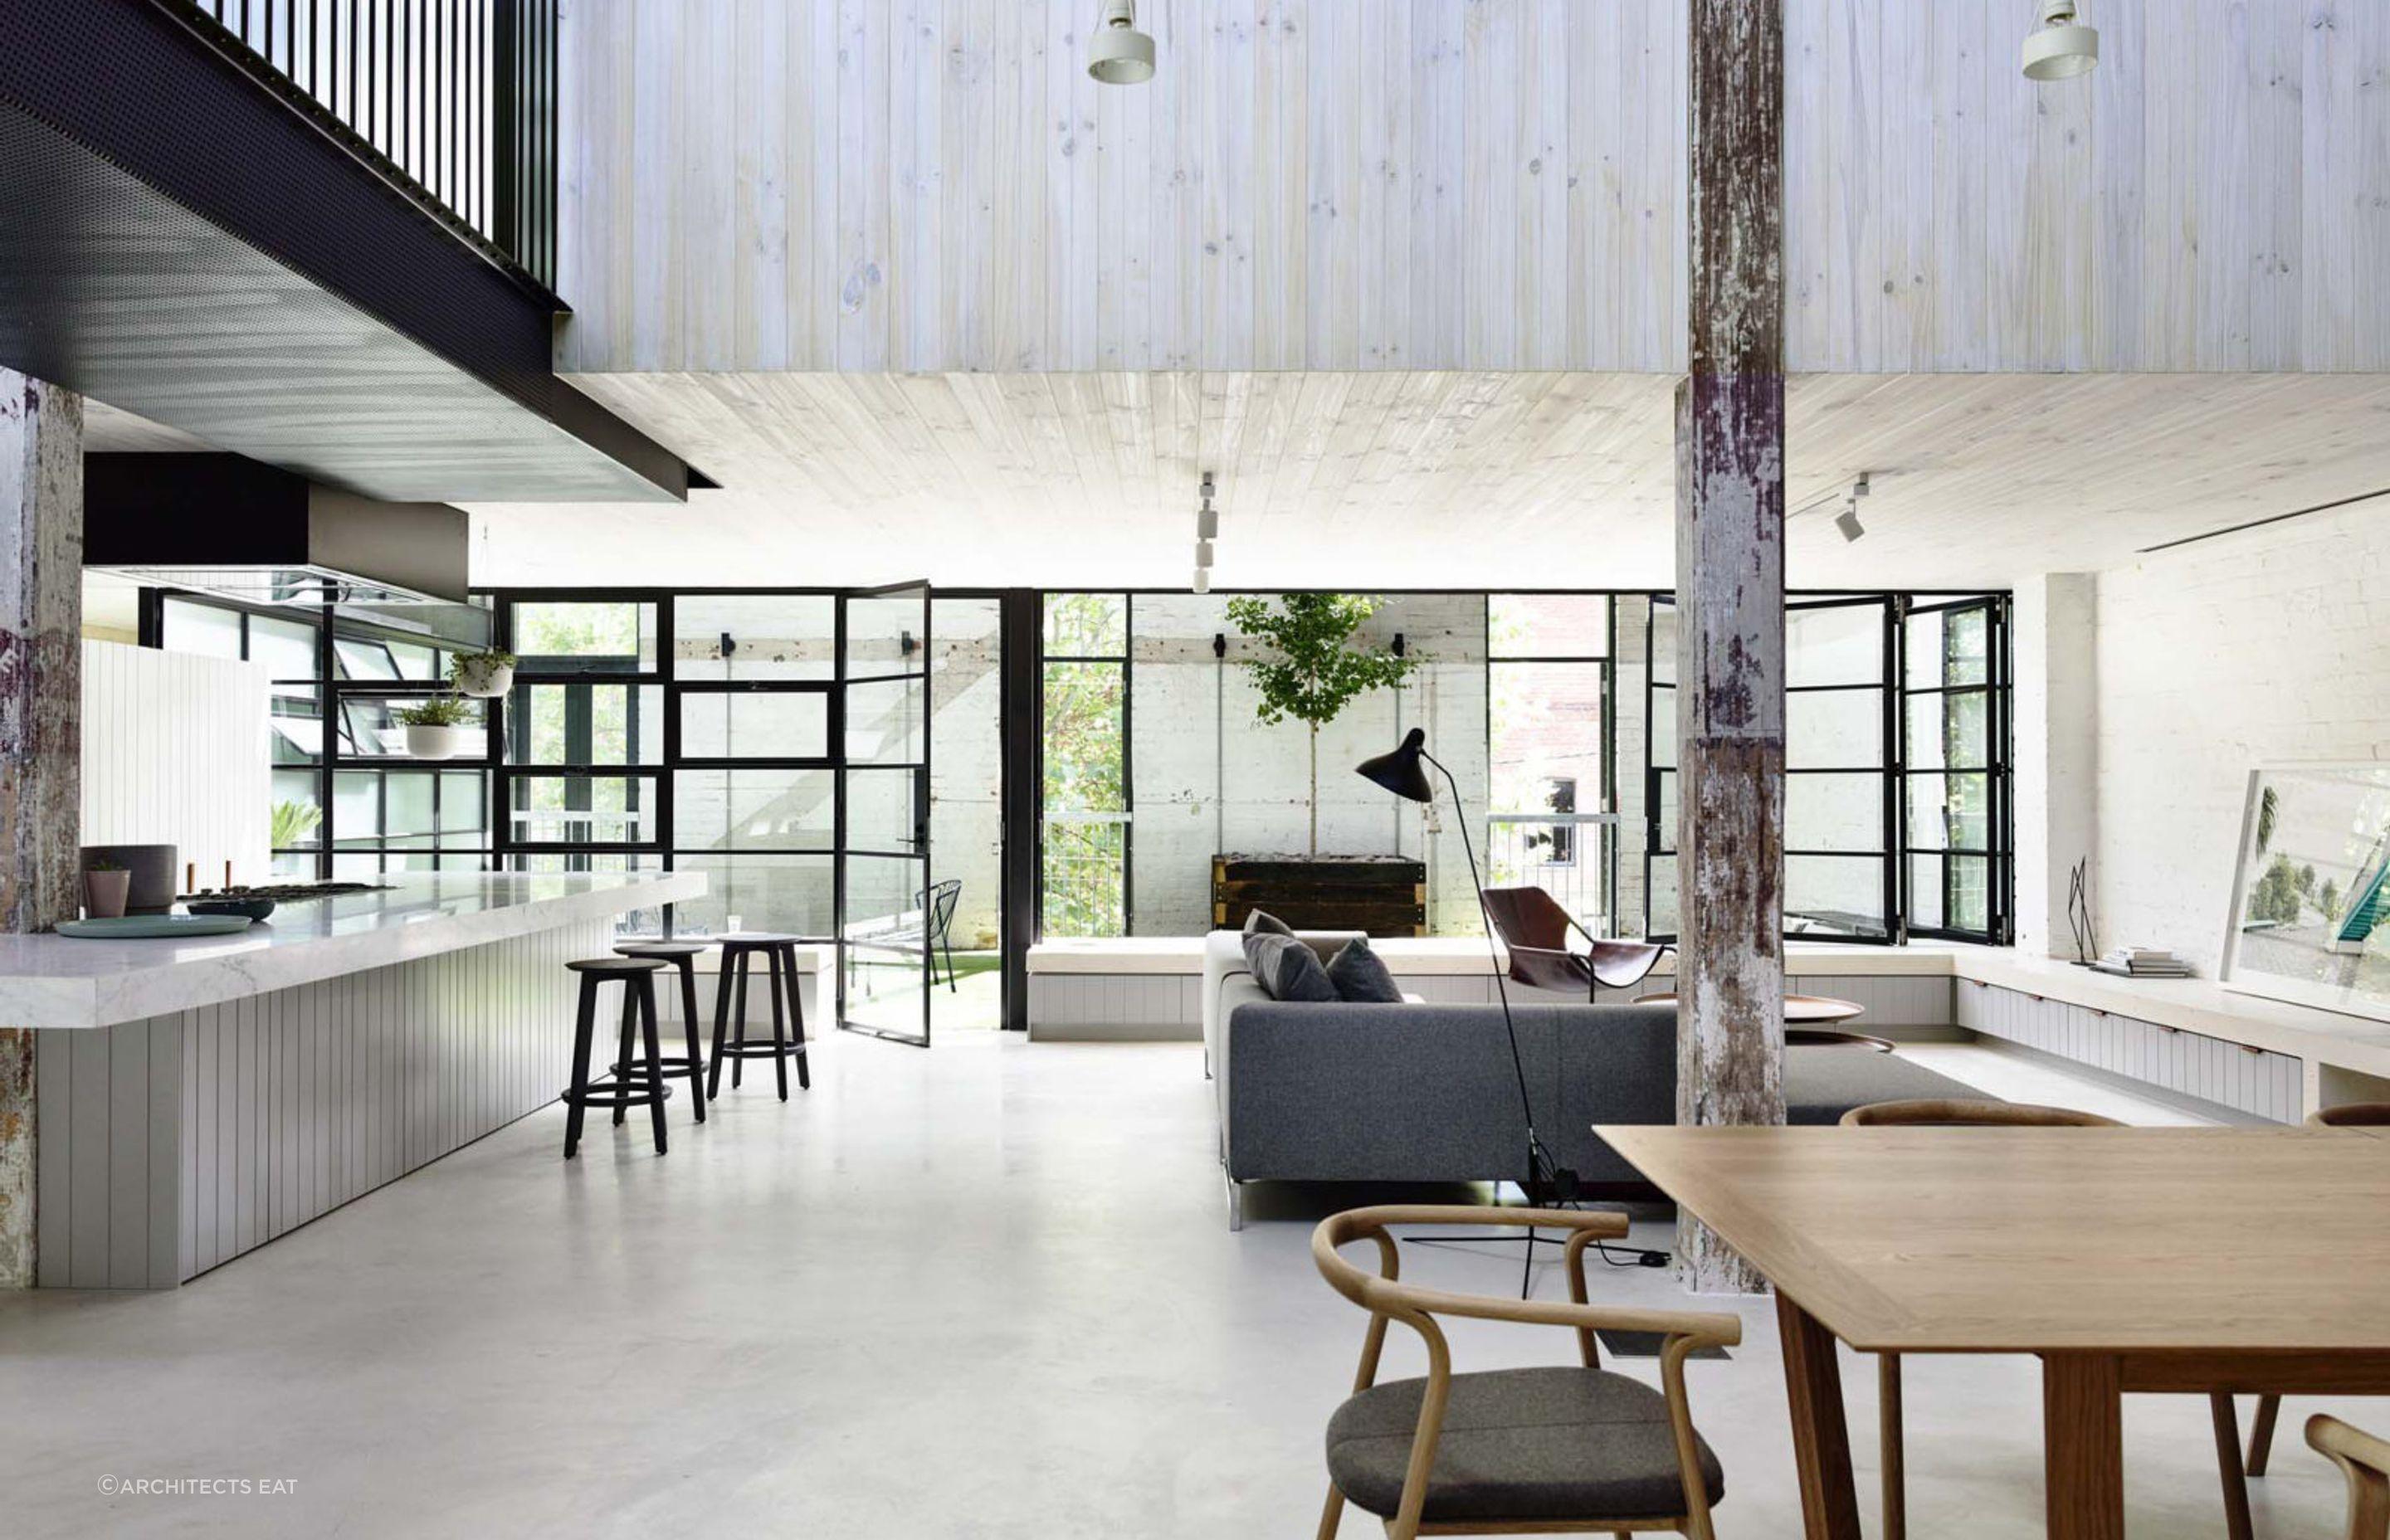 The award-winning Fitzroy Loft, an impeccably conceived industrial style home - Photography: Derek Swalwell